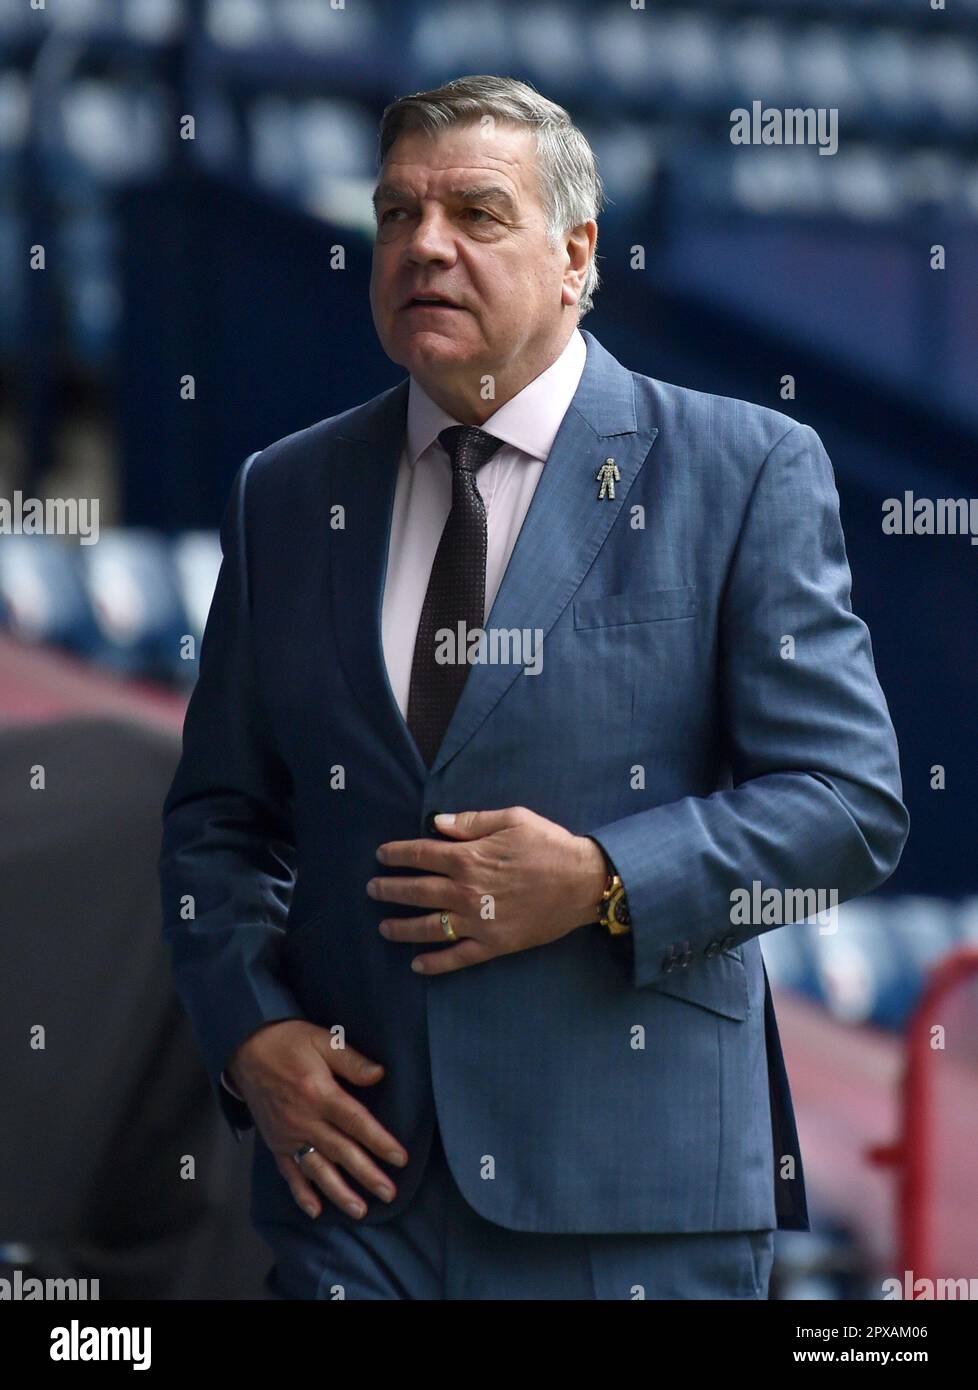 File photo dated 16-05-2021 of Sam Allardyce. Leeds are considering sacking Javi Gracia after just two months in charge, according to reports, with Sam Allardyce said to be among the names in the frame to replace him. Issue date: Tuesday May 2, 2023. Stock Photo